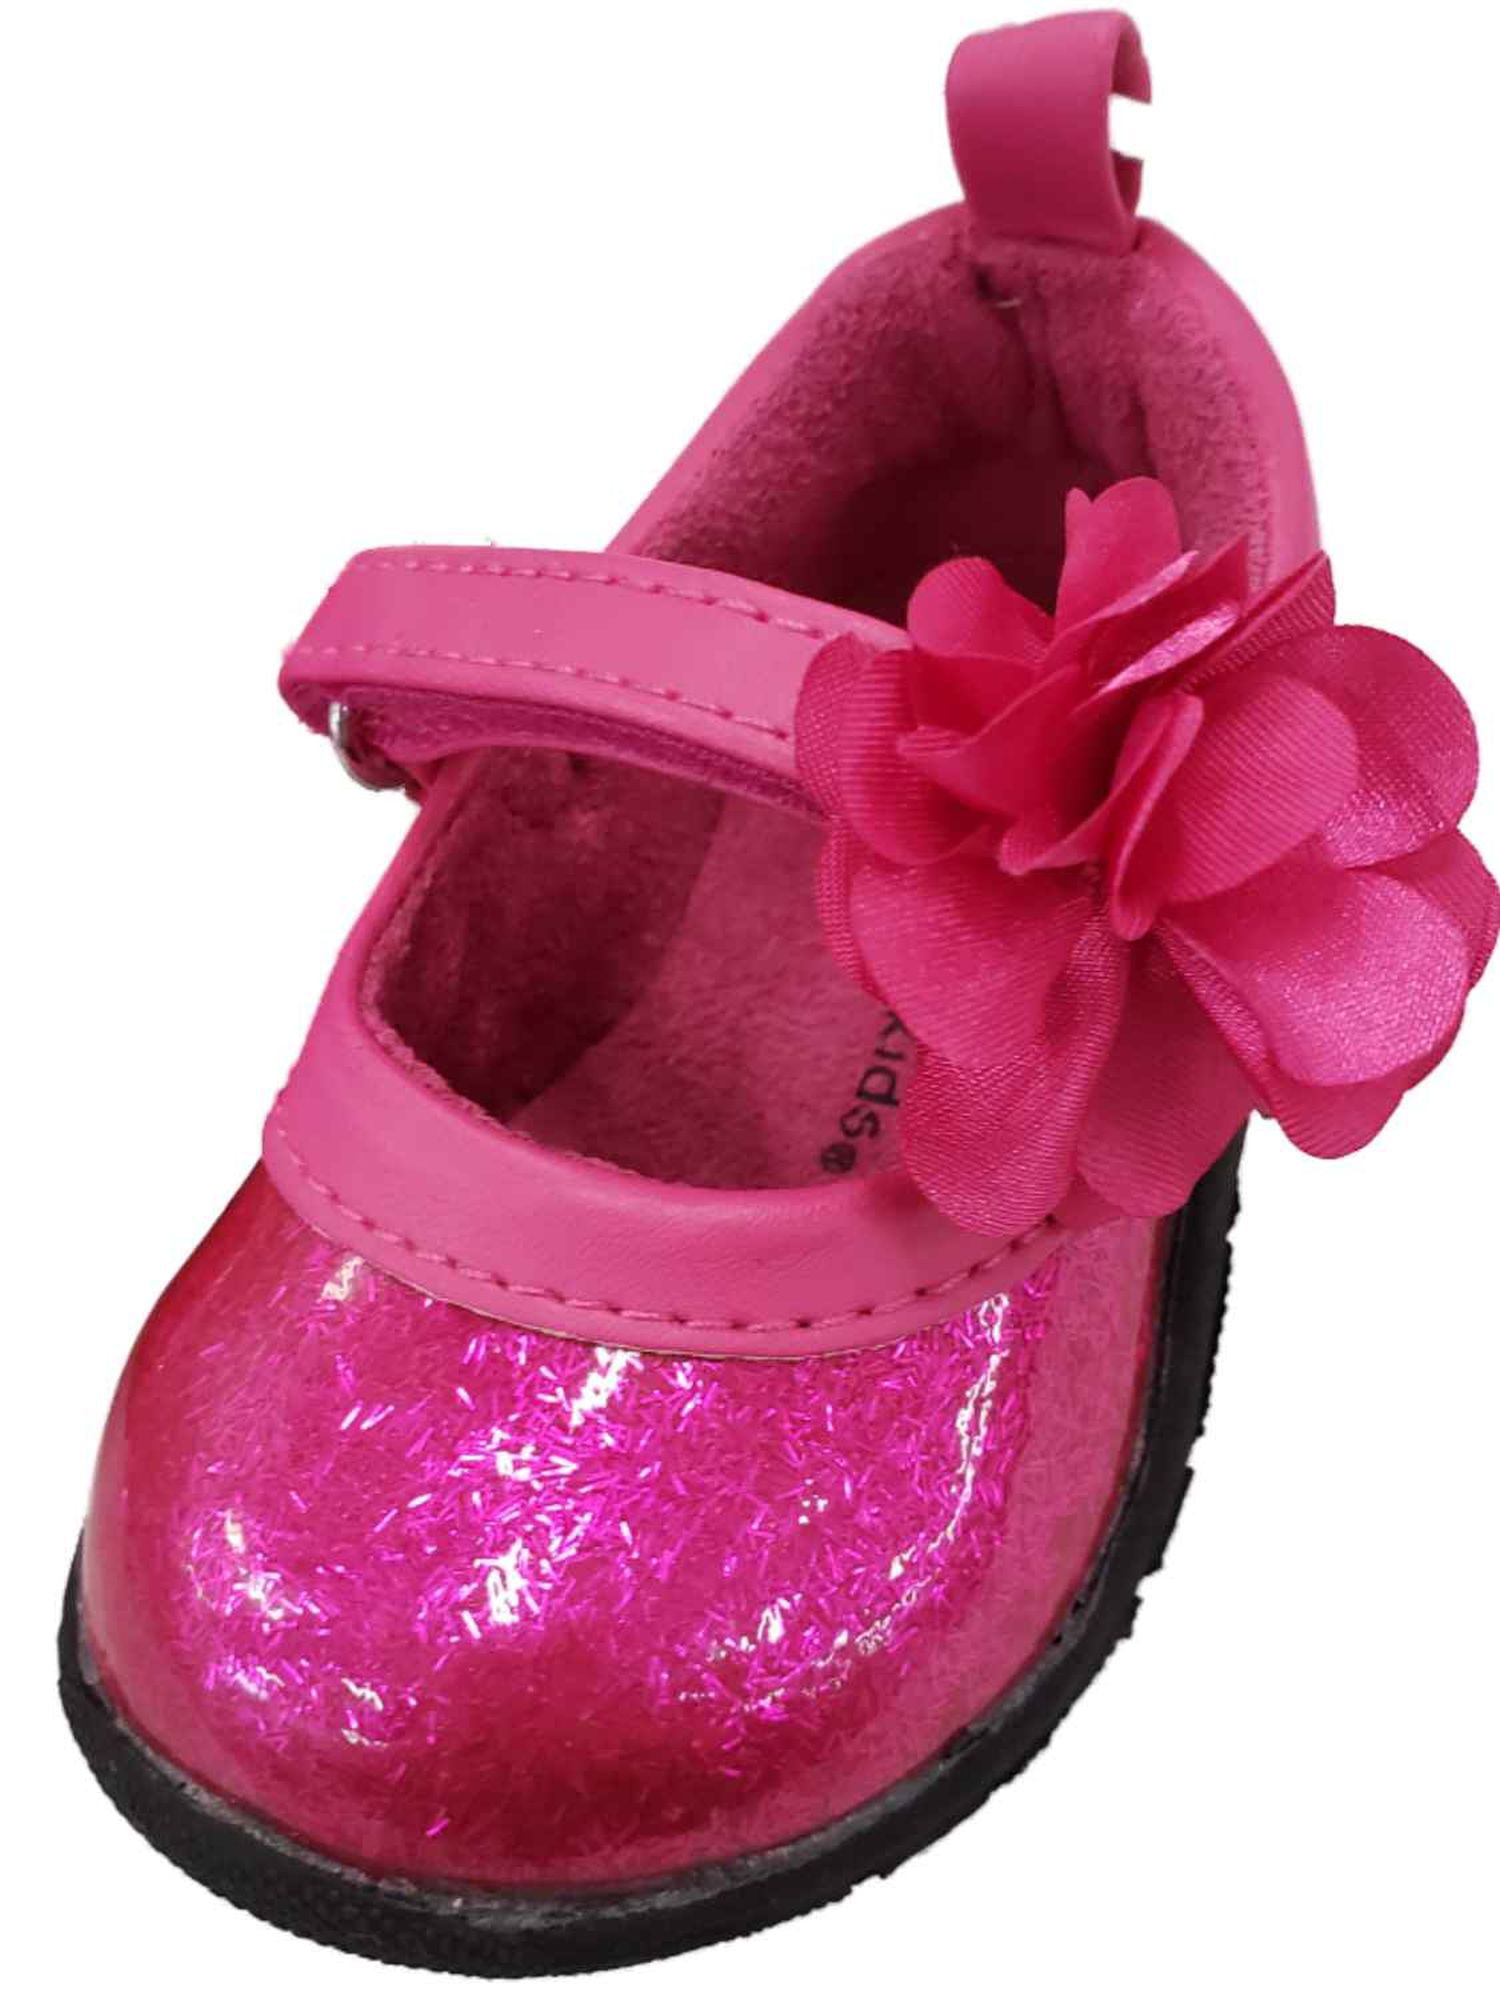 hot pink mary janes